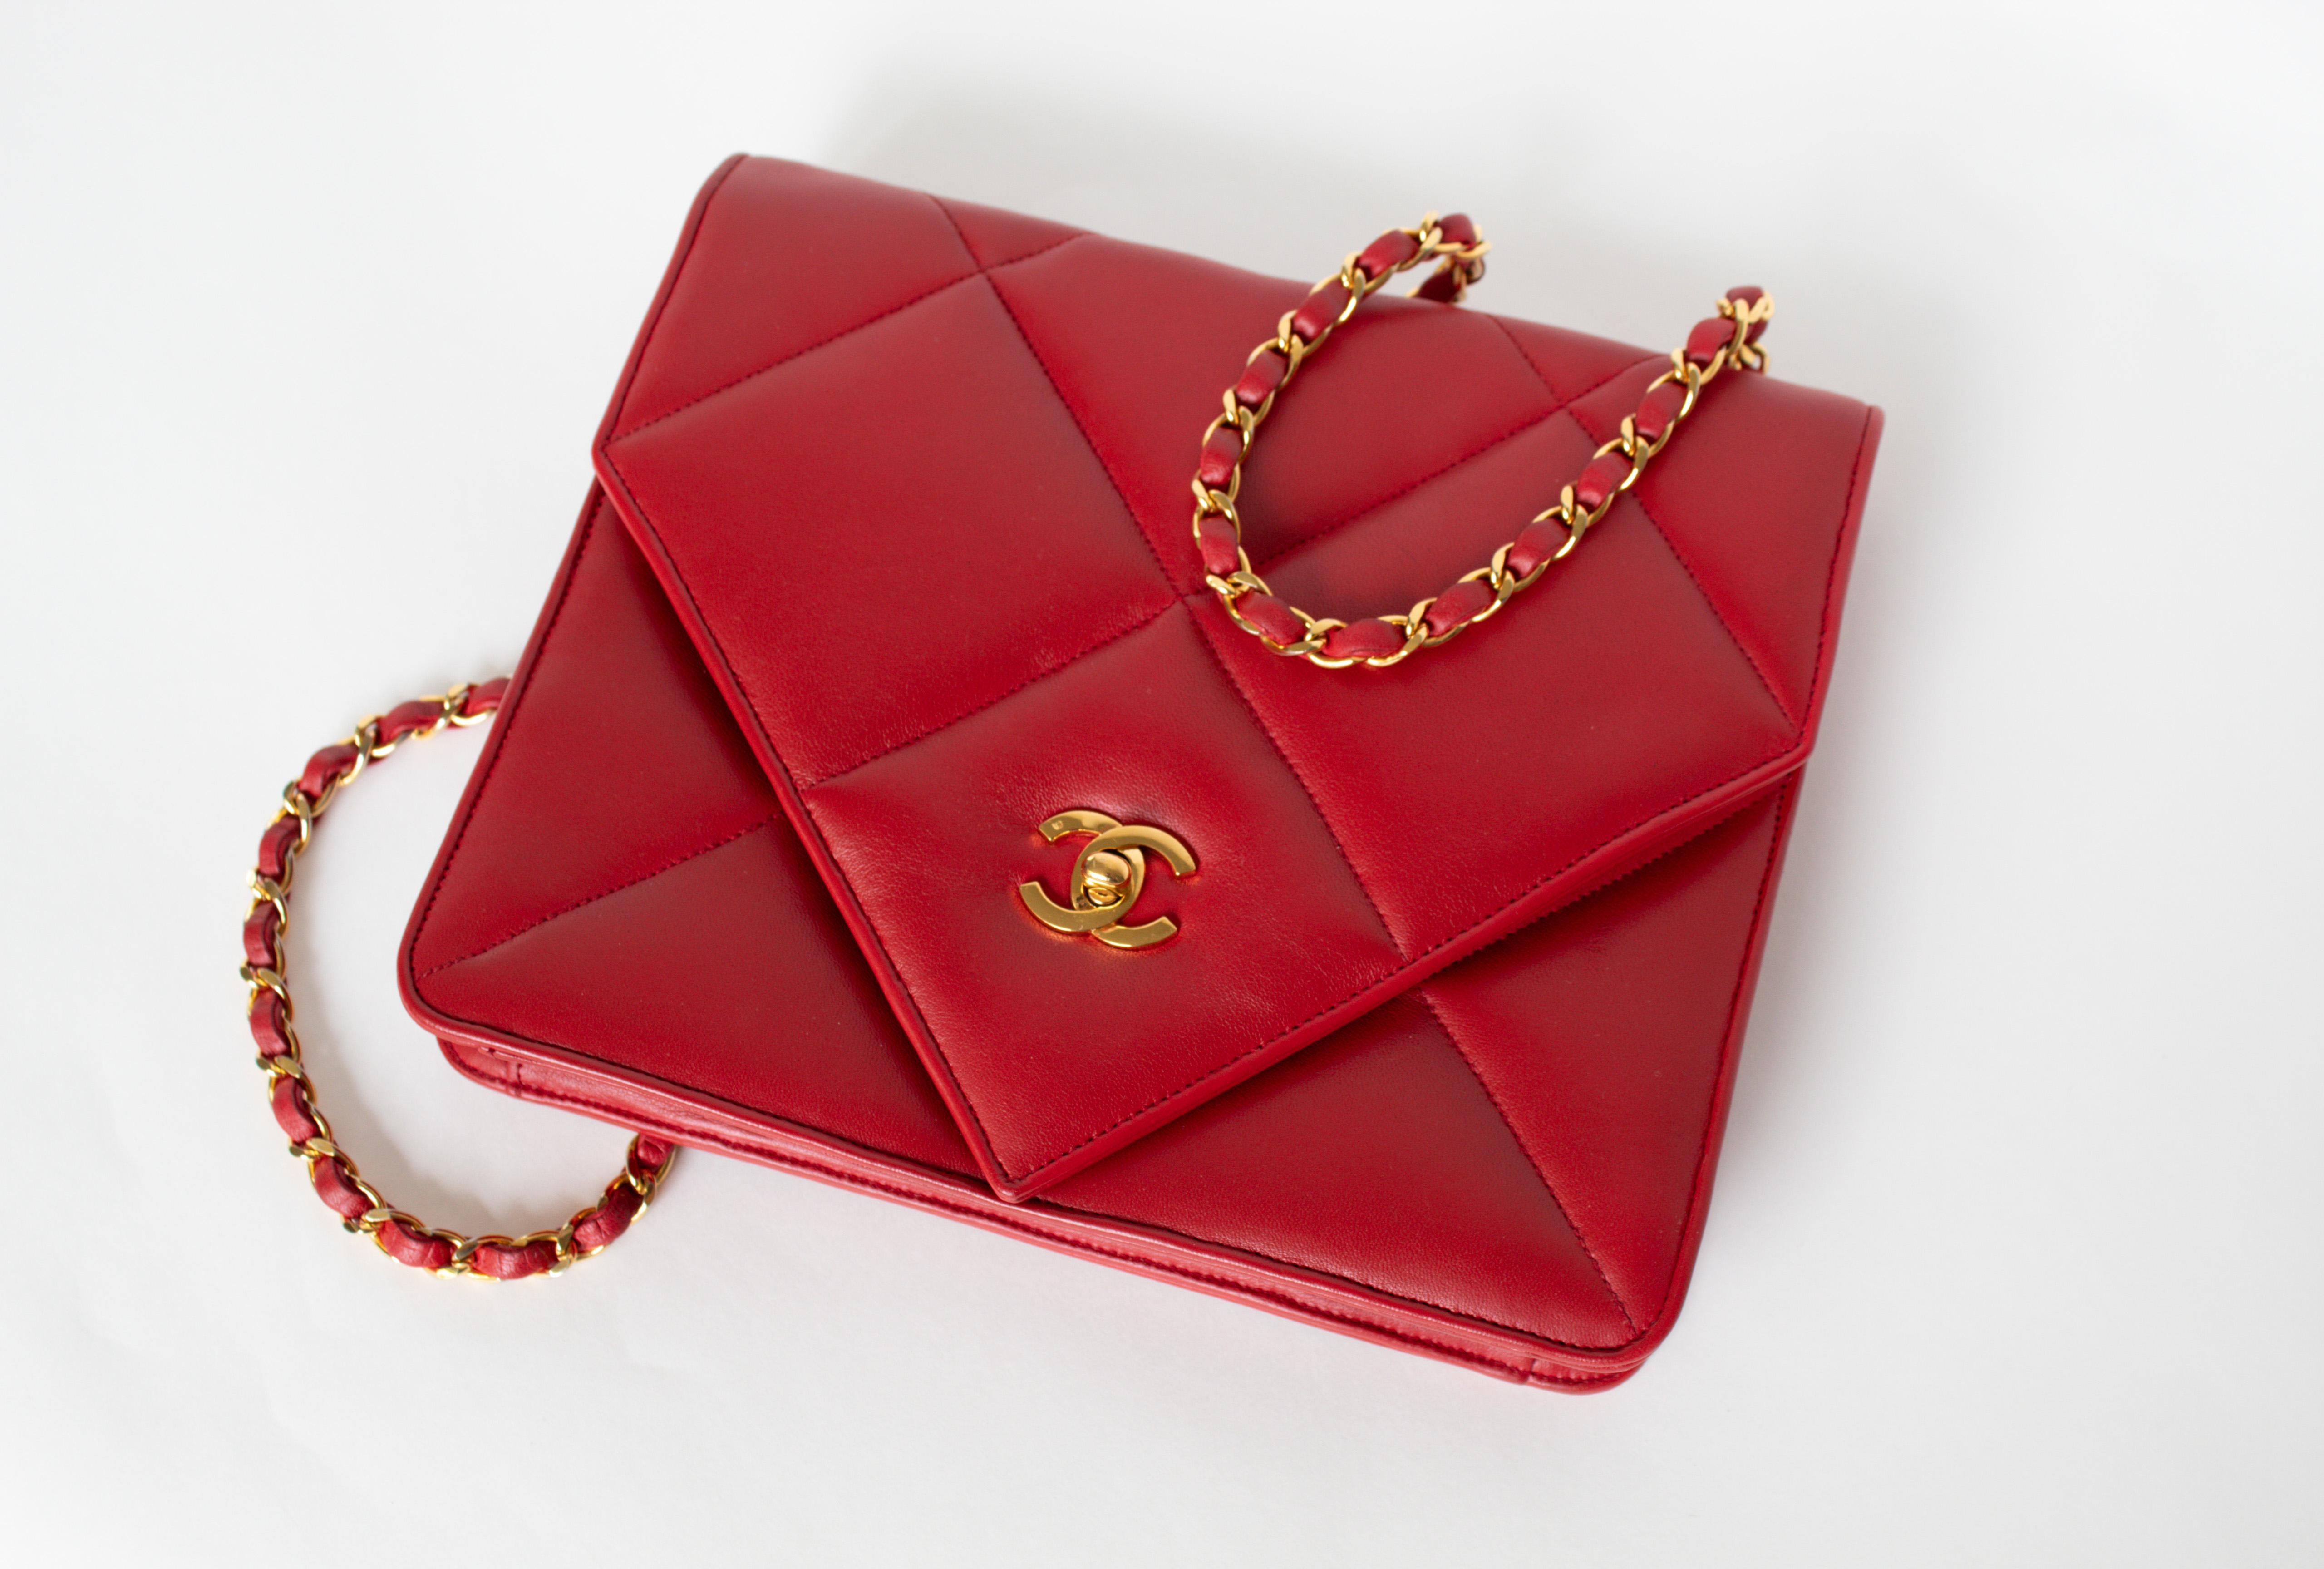 Classic Chanel 19 Vintage Rare 90s Jumbo Lambskin Red Envelope Flap Bag 


Classic Chanel Rare Jumbo flap bag in vintage 90s red lambskin with rare envelope V flap closure. 

Chanel bag in red lambskin with gold hardware, this bag looks like a